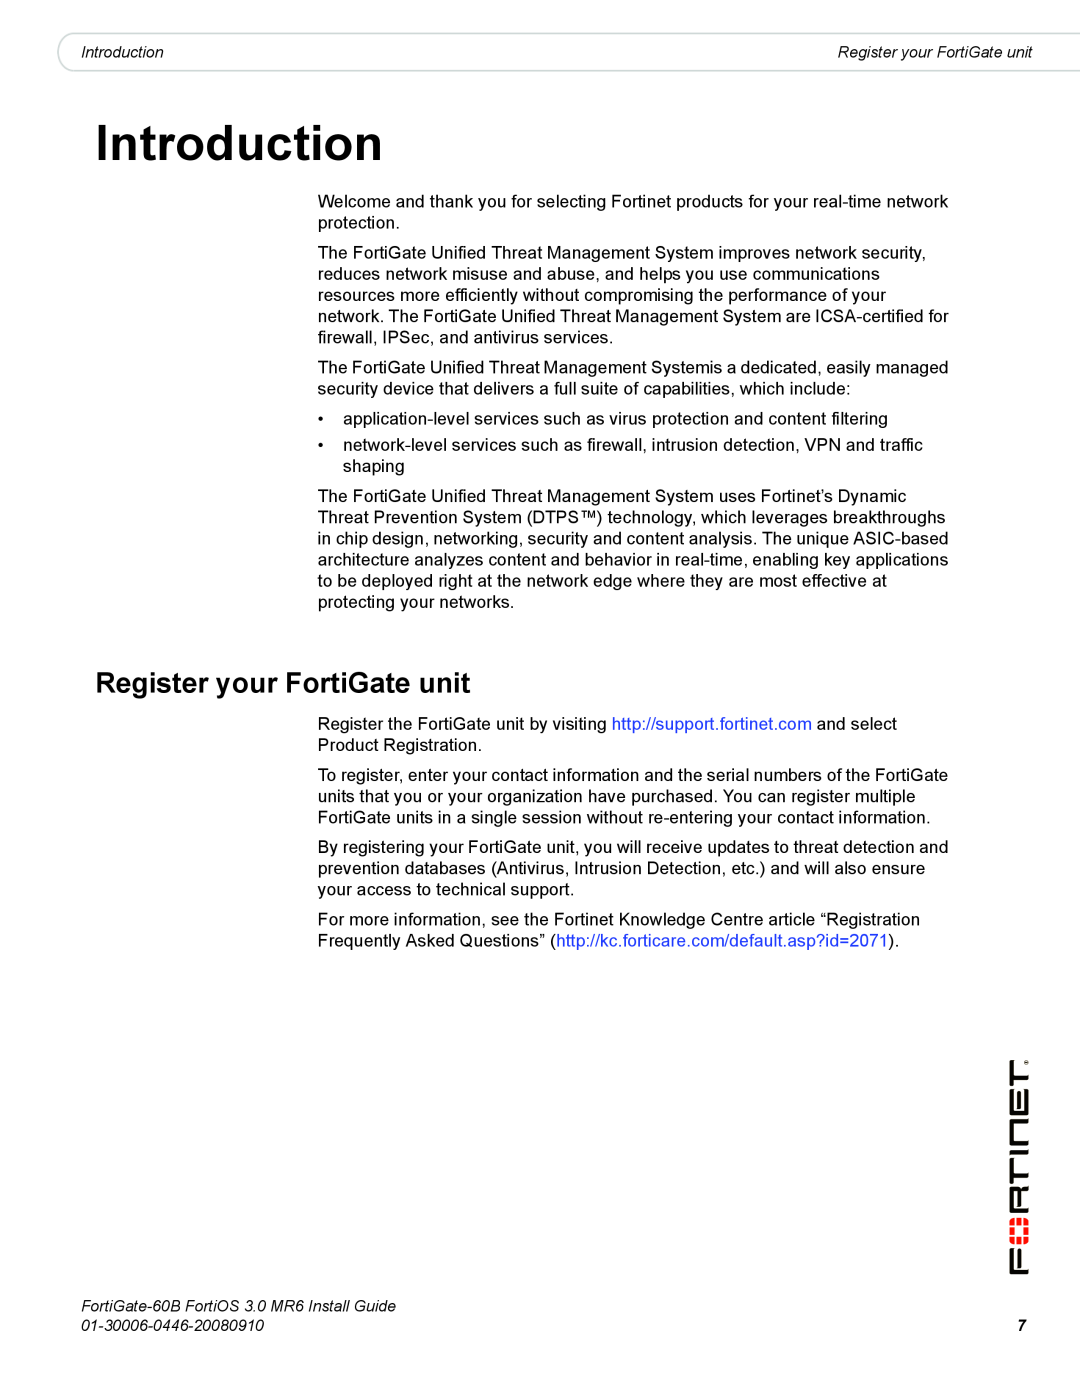 Fortinet 60B manual Introduction, Register your FortiGate unit 